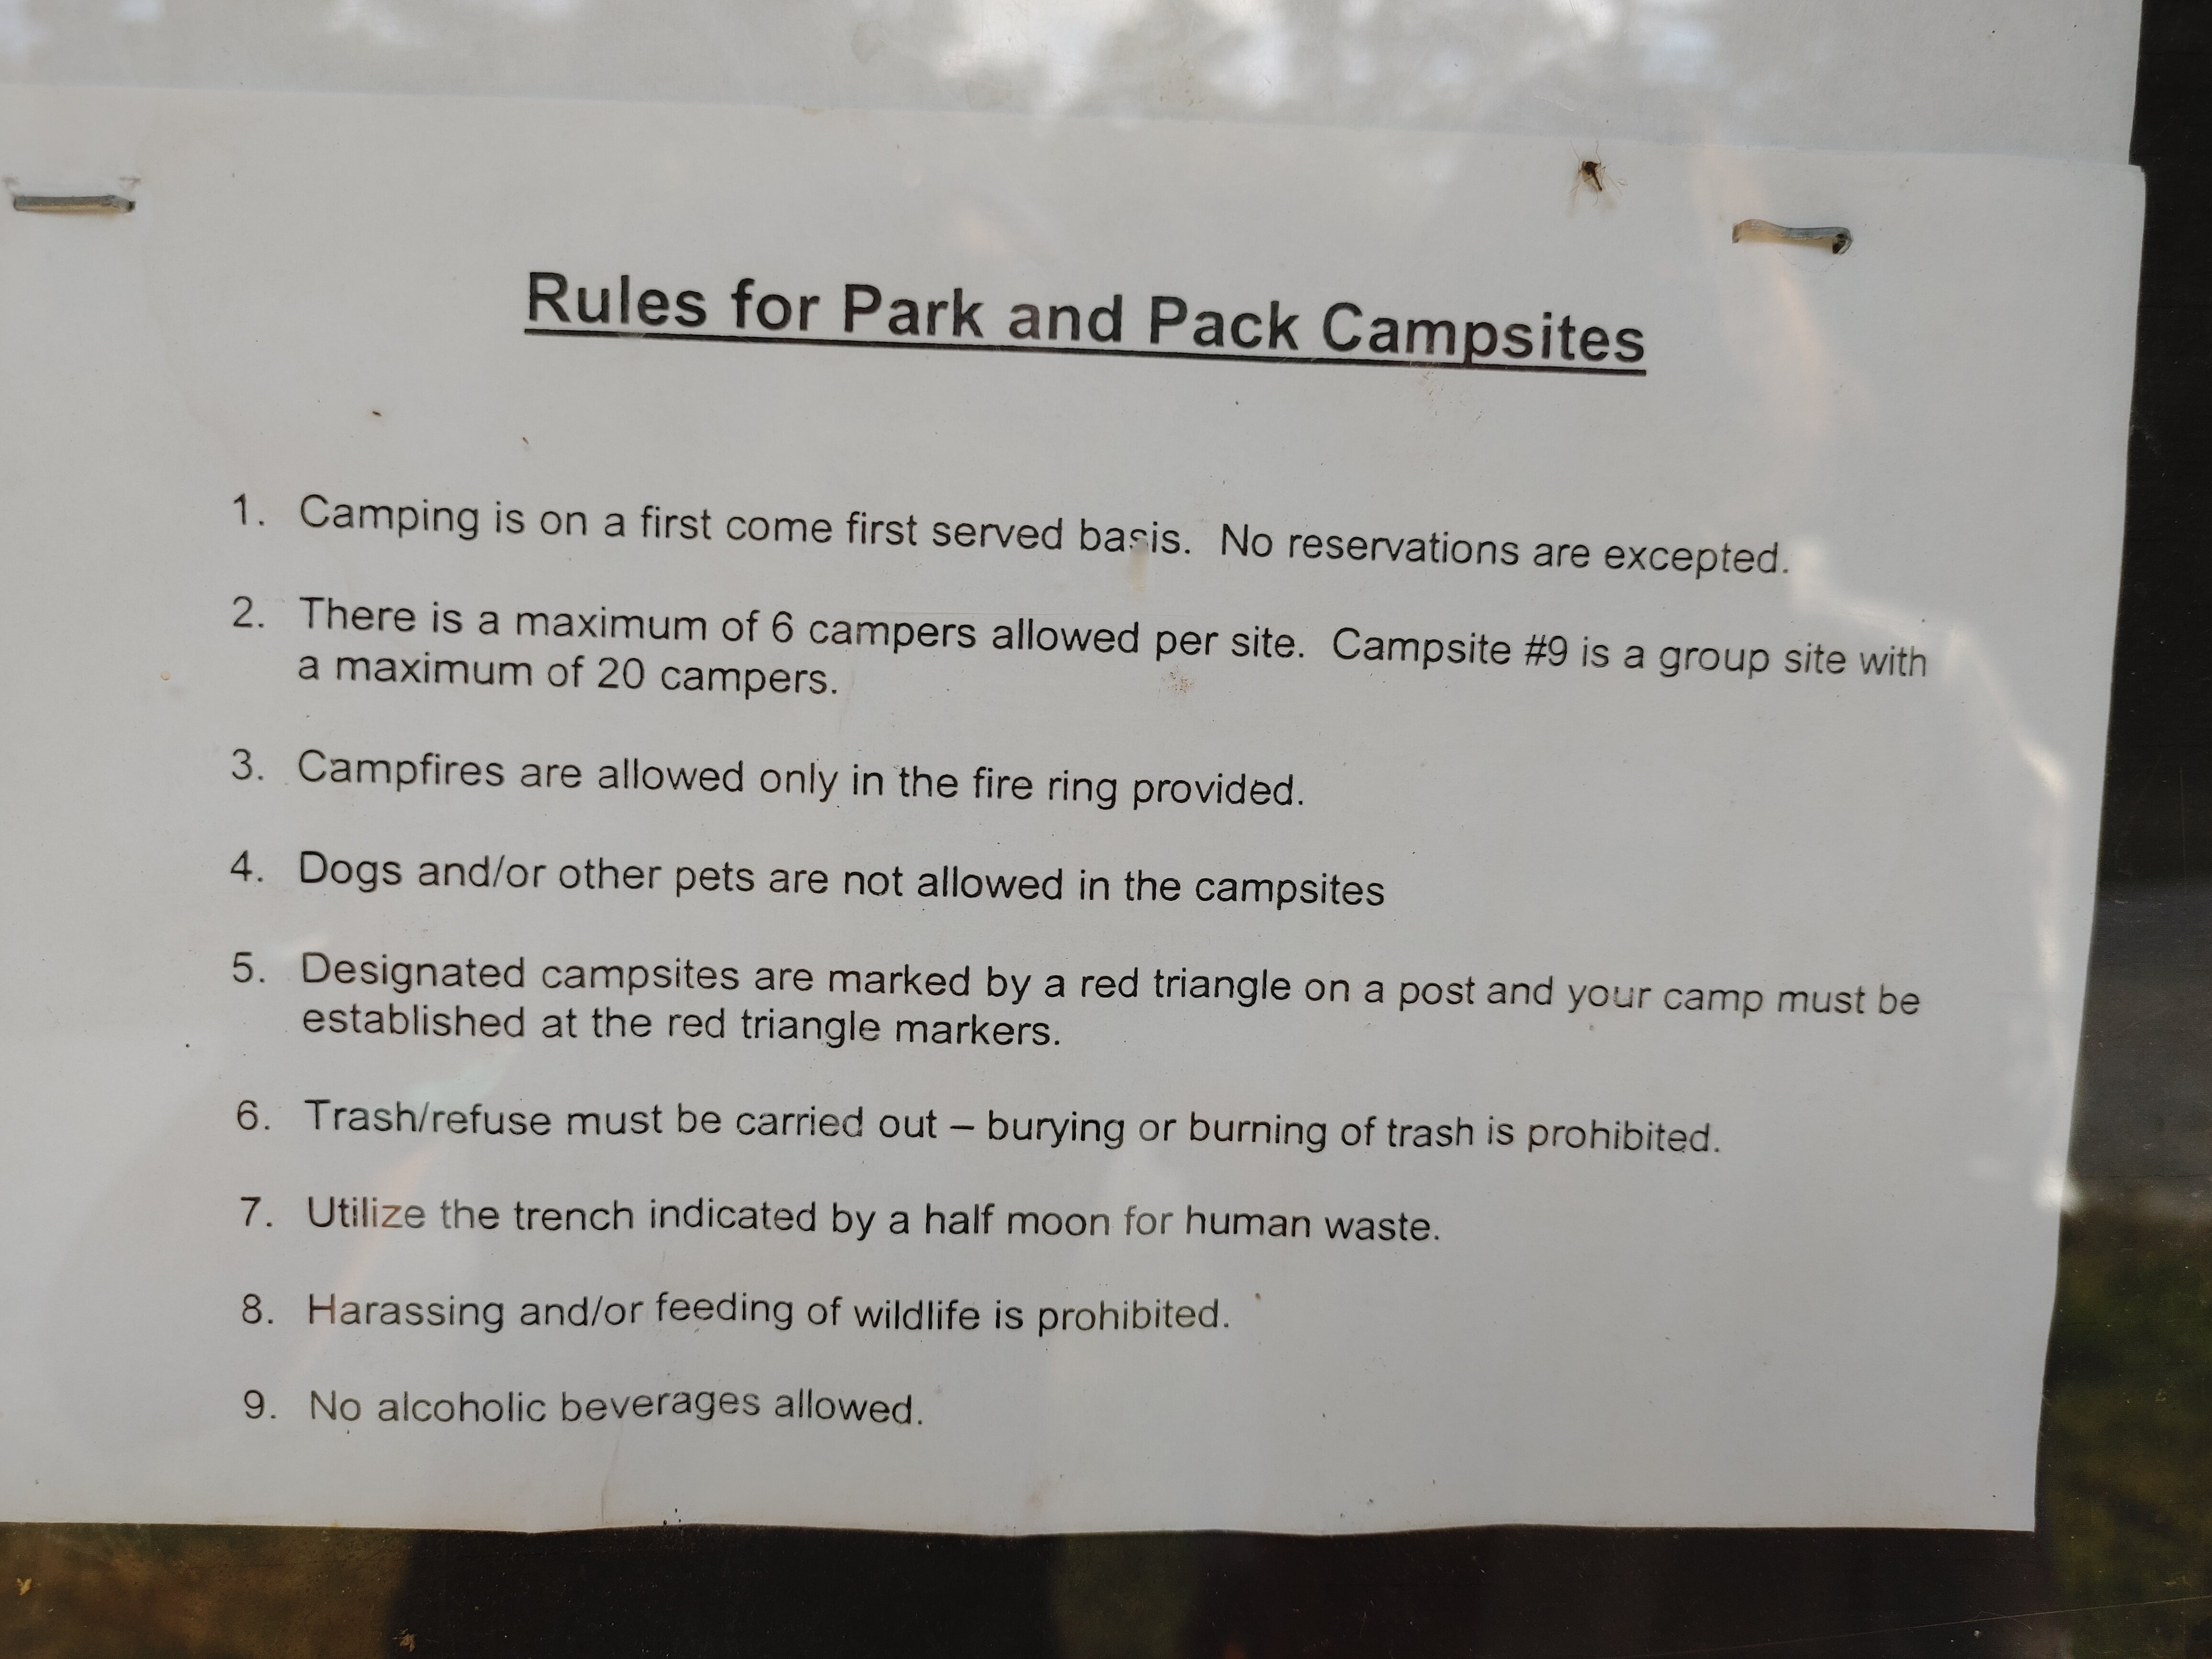 Respect the campsites as they are awesome and free.